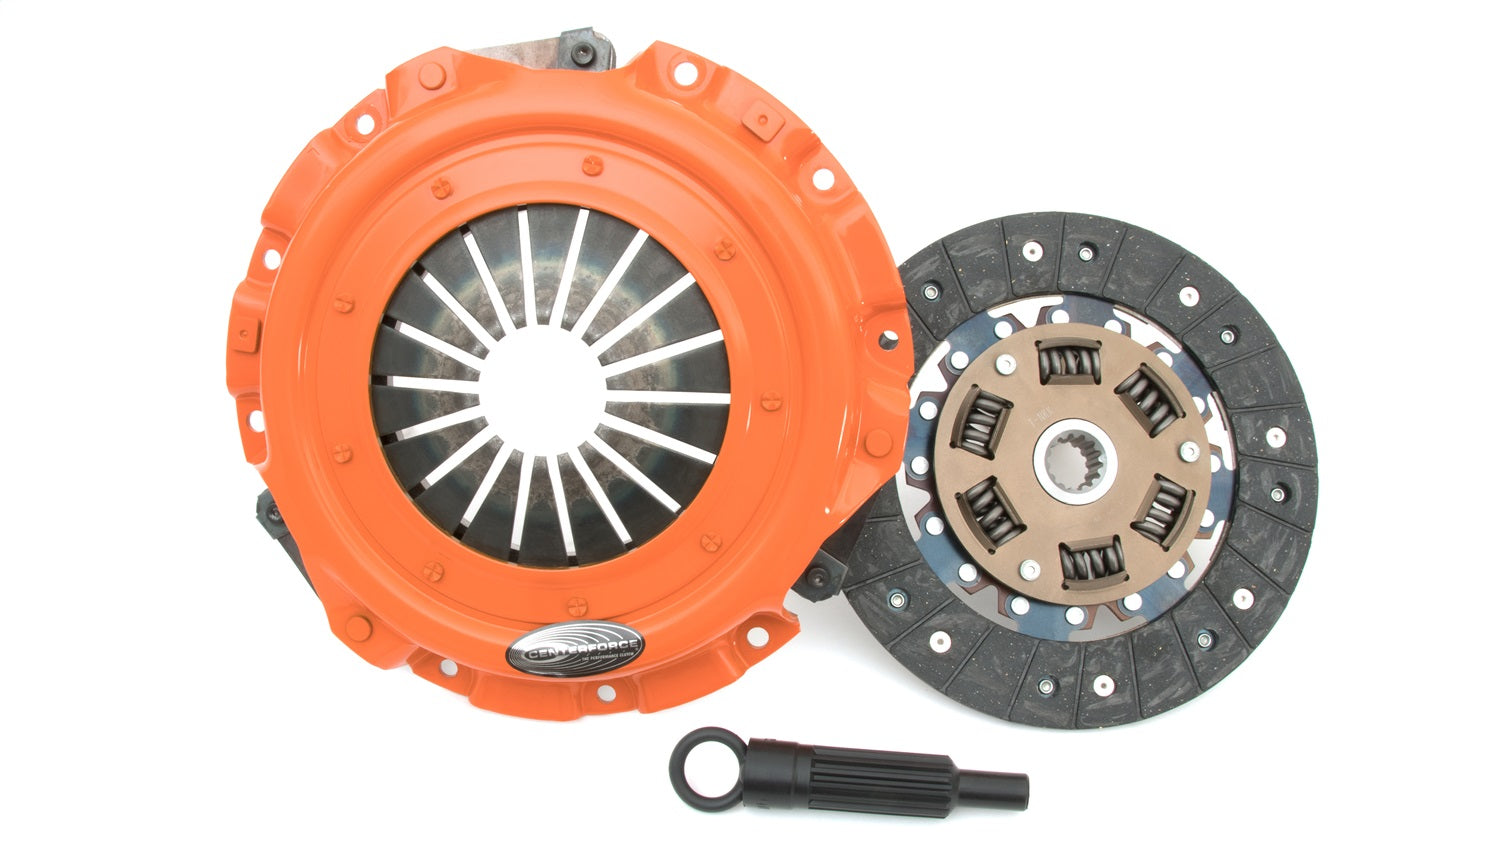 Centerforce DF201614 Dual Friction Clutch Pressure Plate And Disc Set